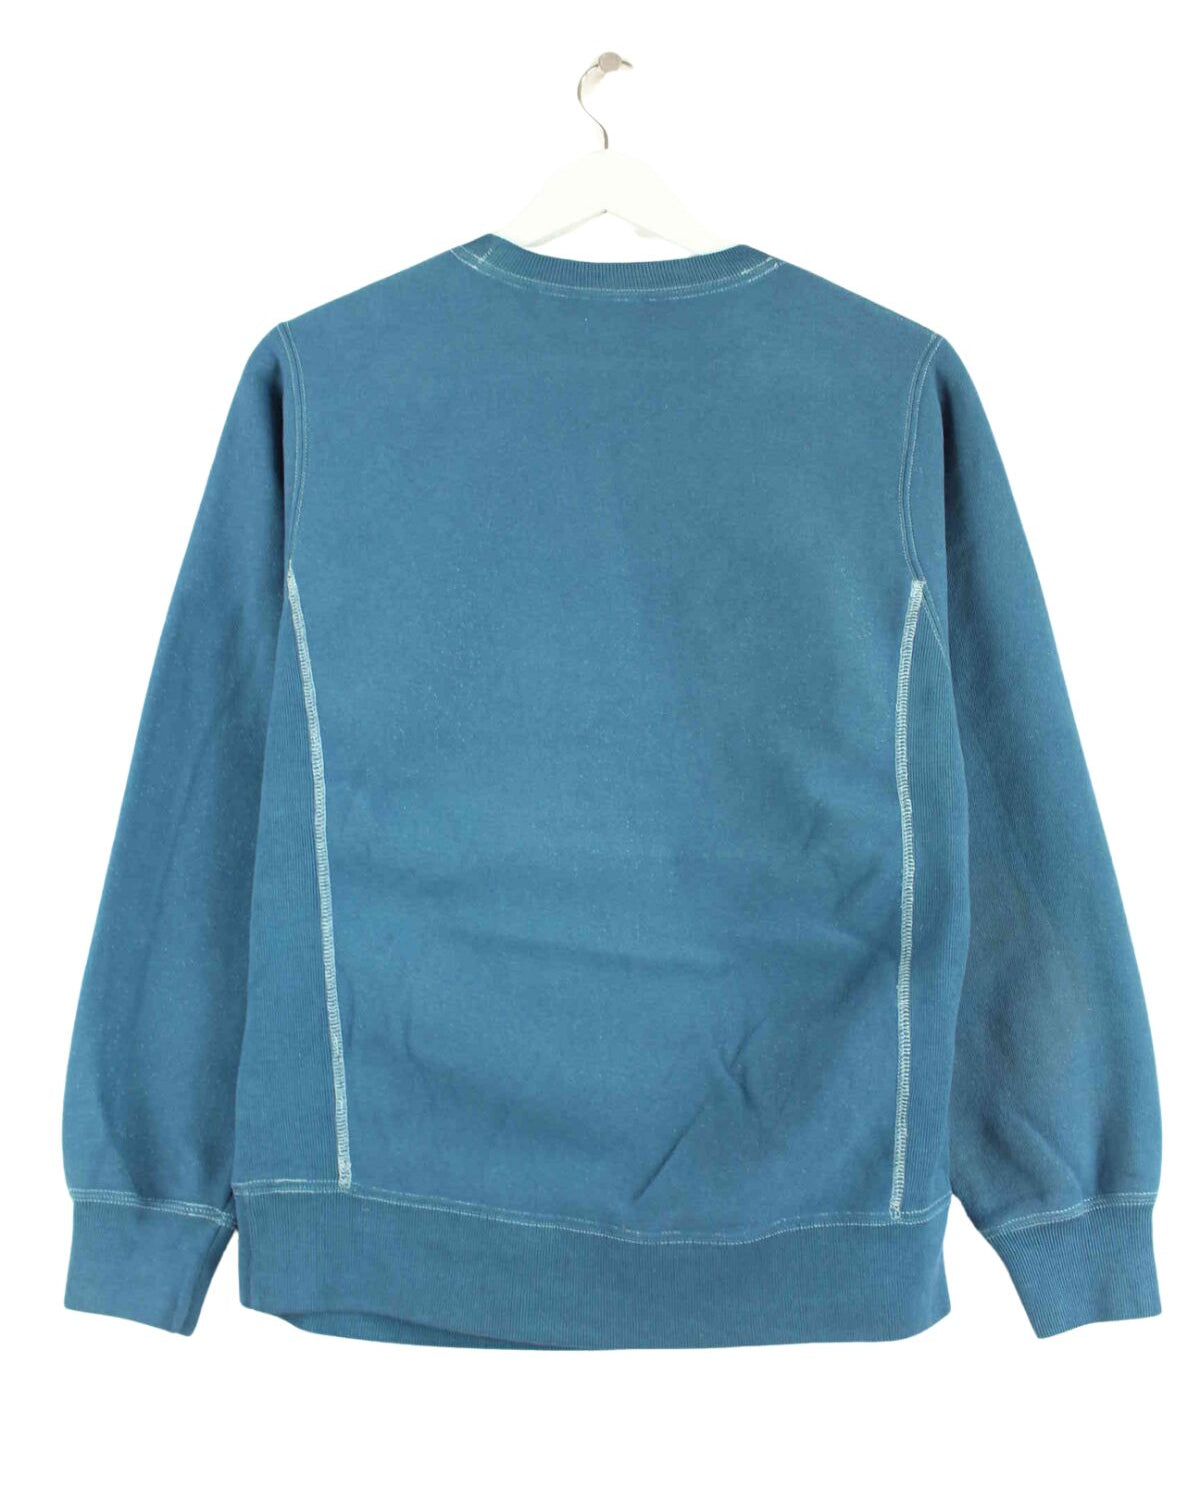 Champion Embroidered Reverse Weave Sweater Blau S (back image)